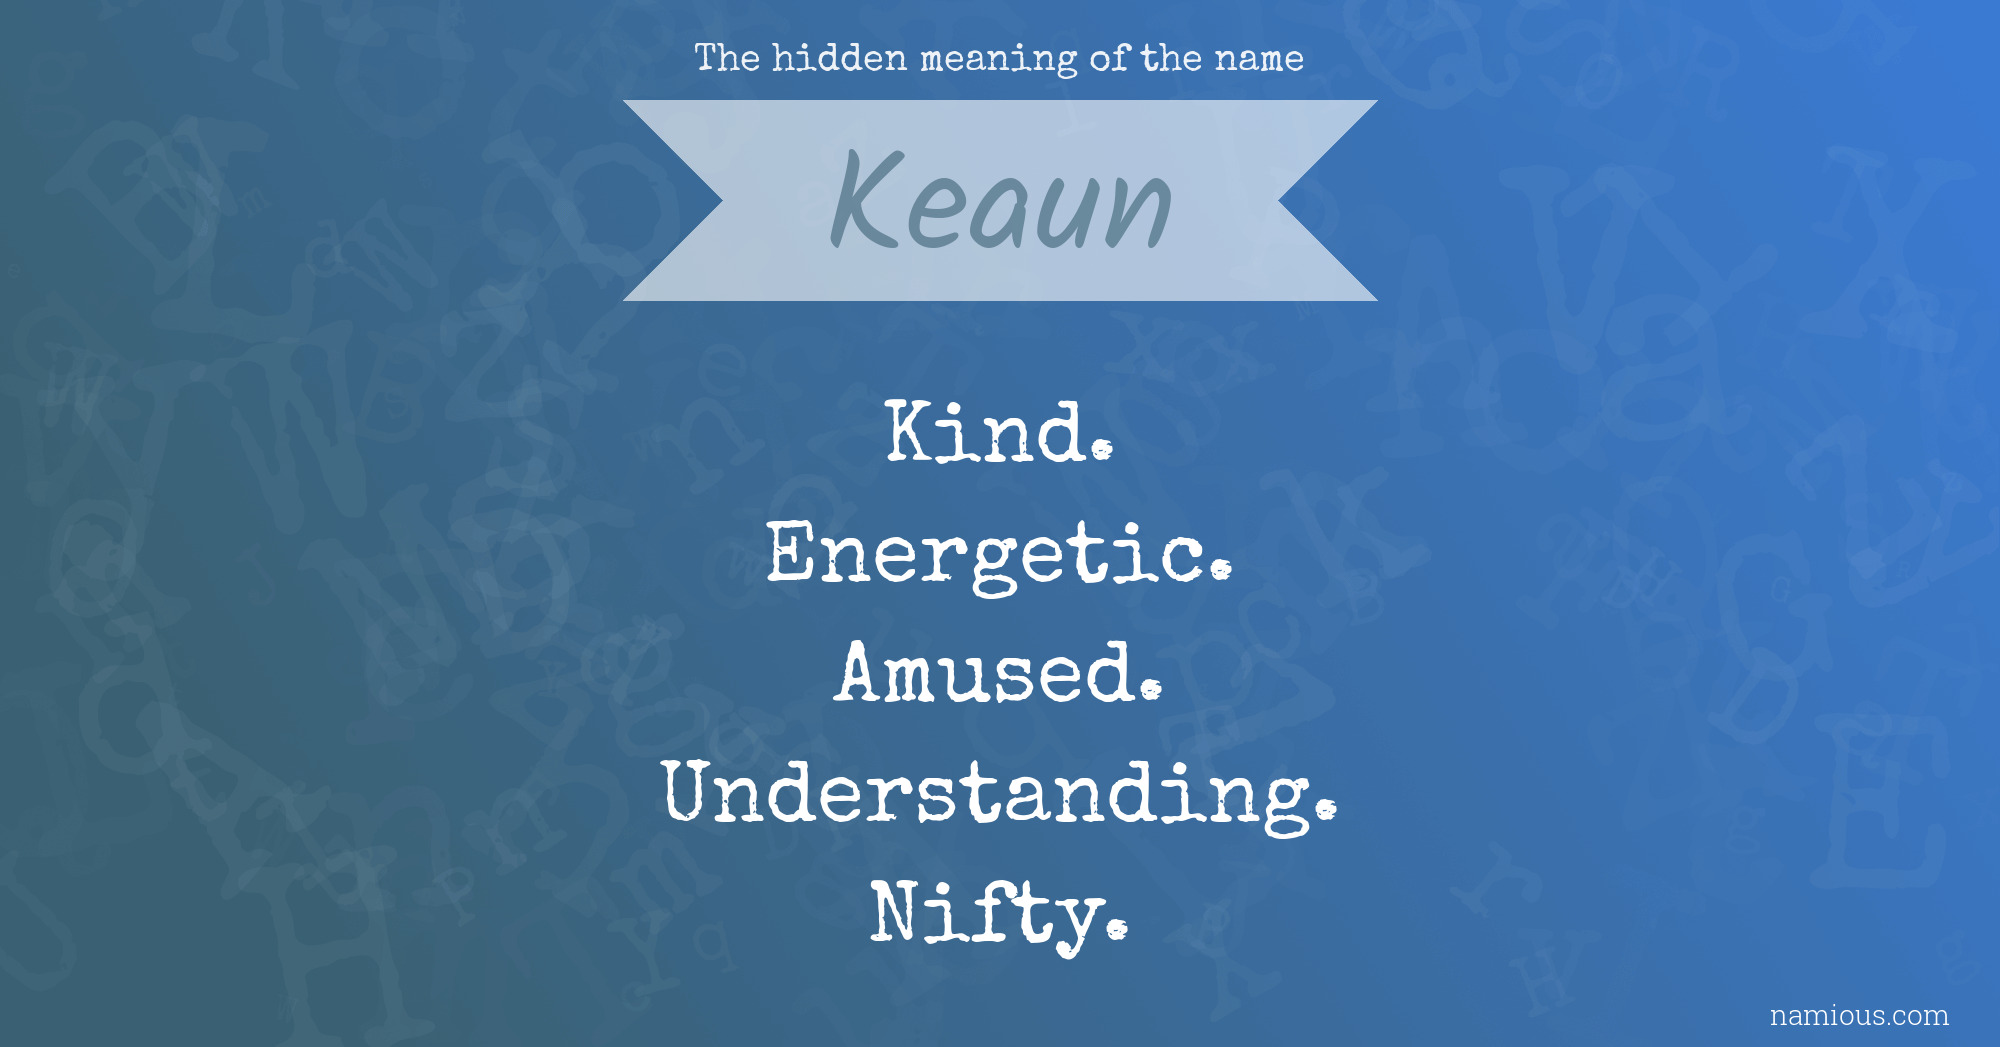 The hidden meaning of the name Keaun